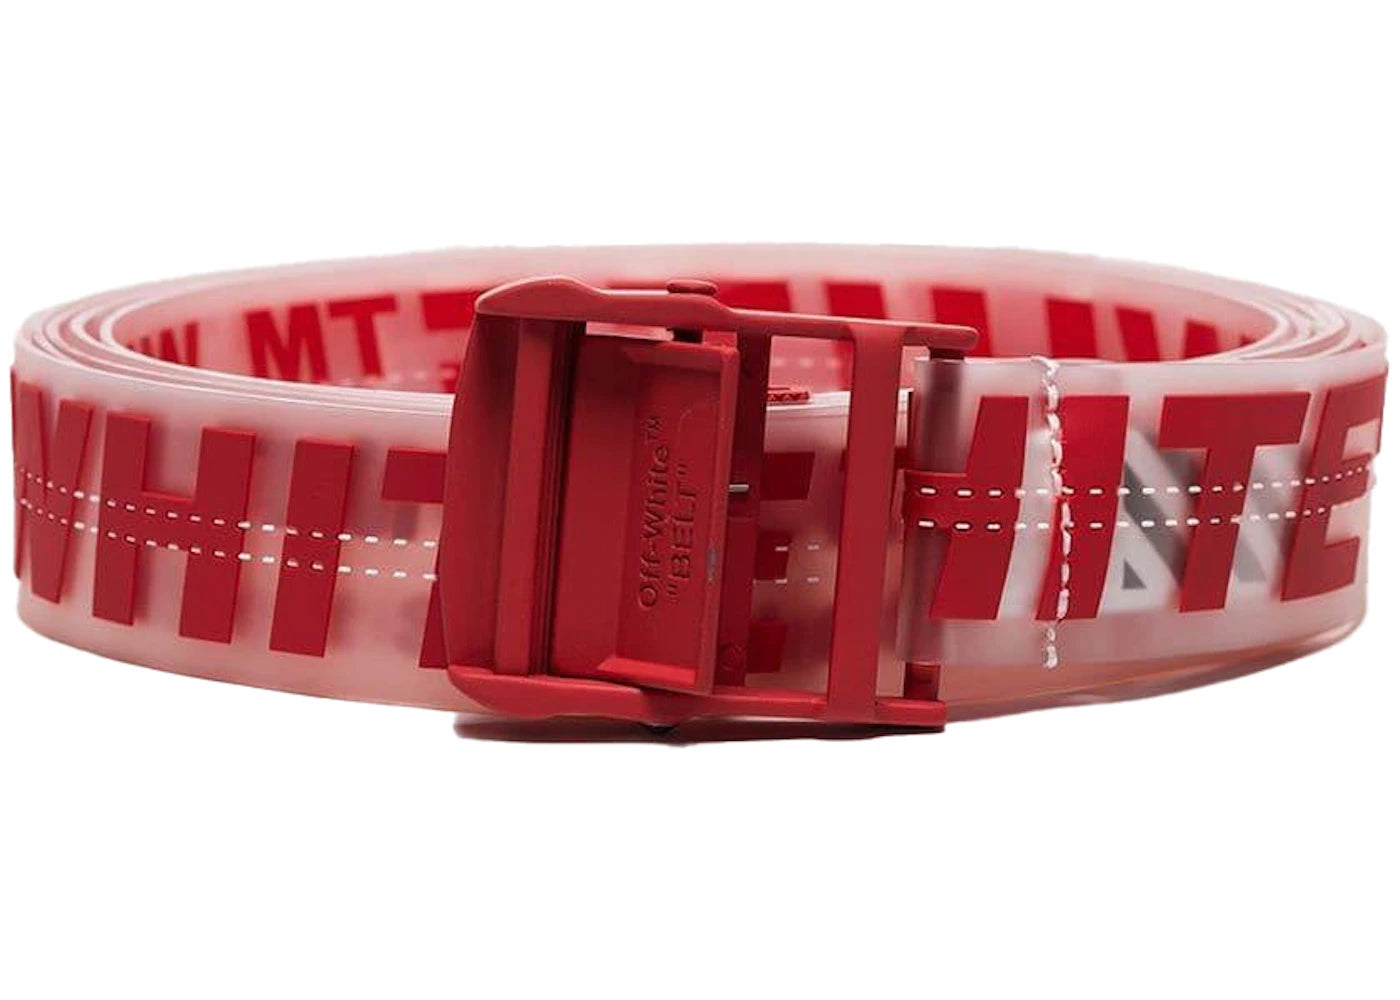 OFF-WHITE RUBBER INDUSTRIAL BELT "RED/WHITE"